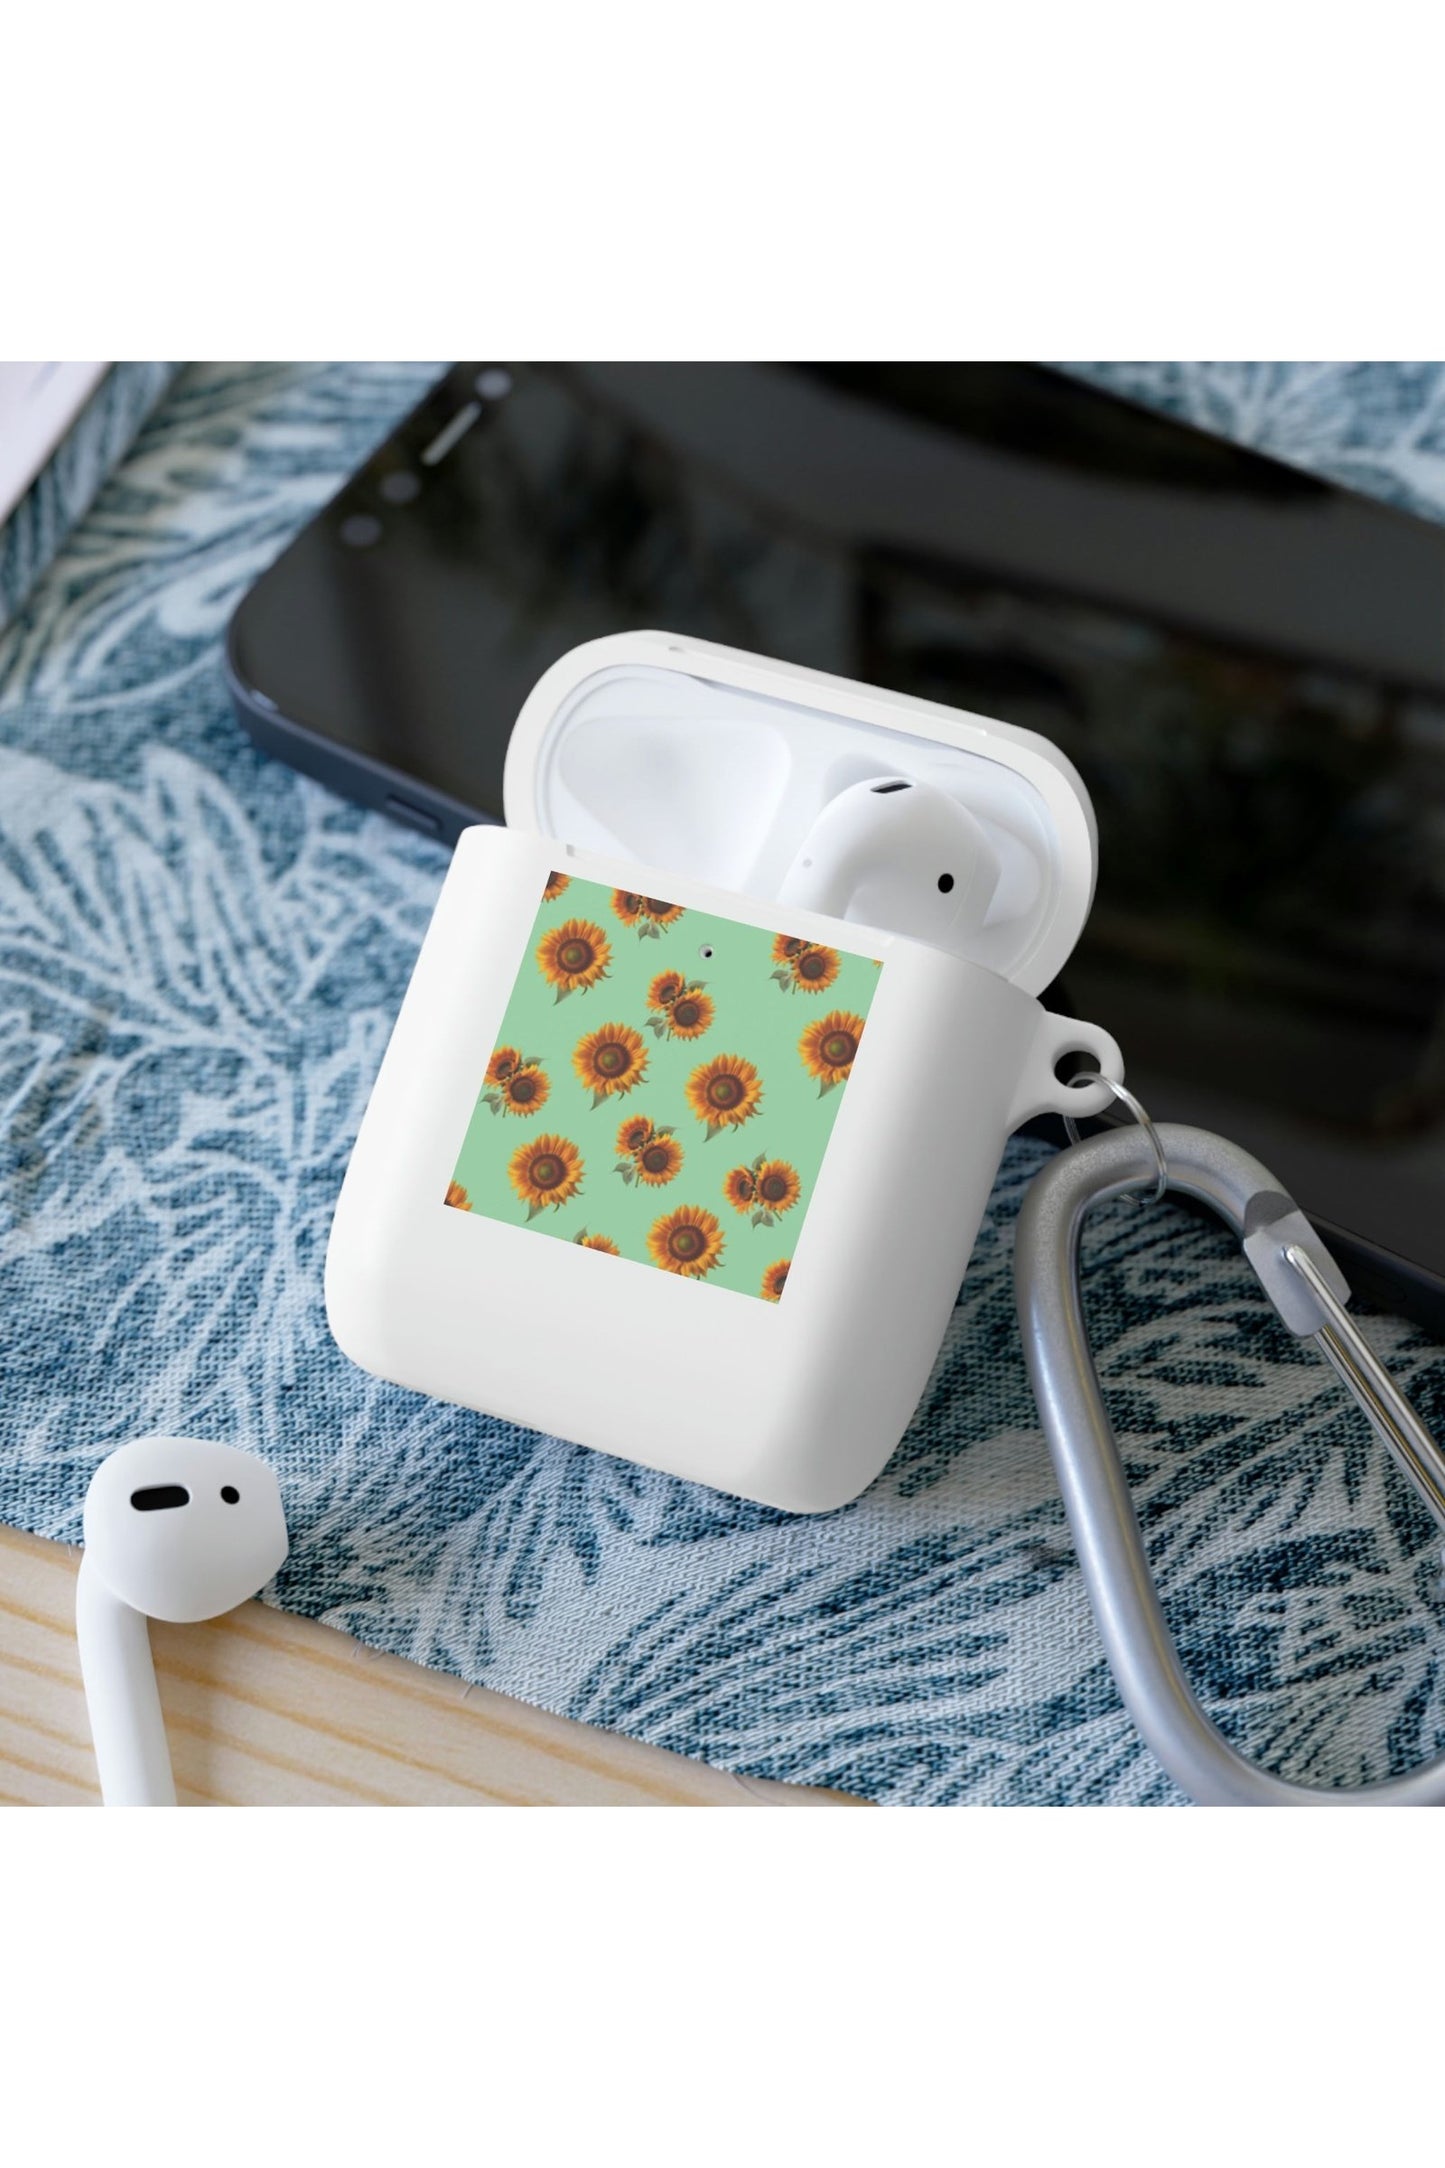 Skull and Sunflower AirPods and AirPods Pro Case Cover